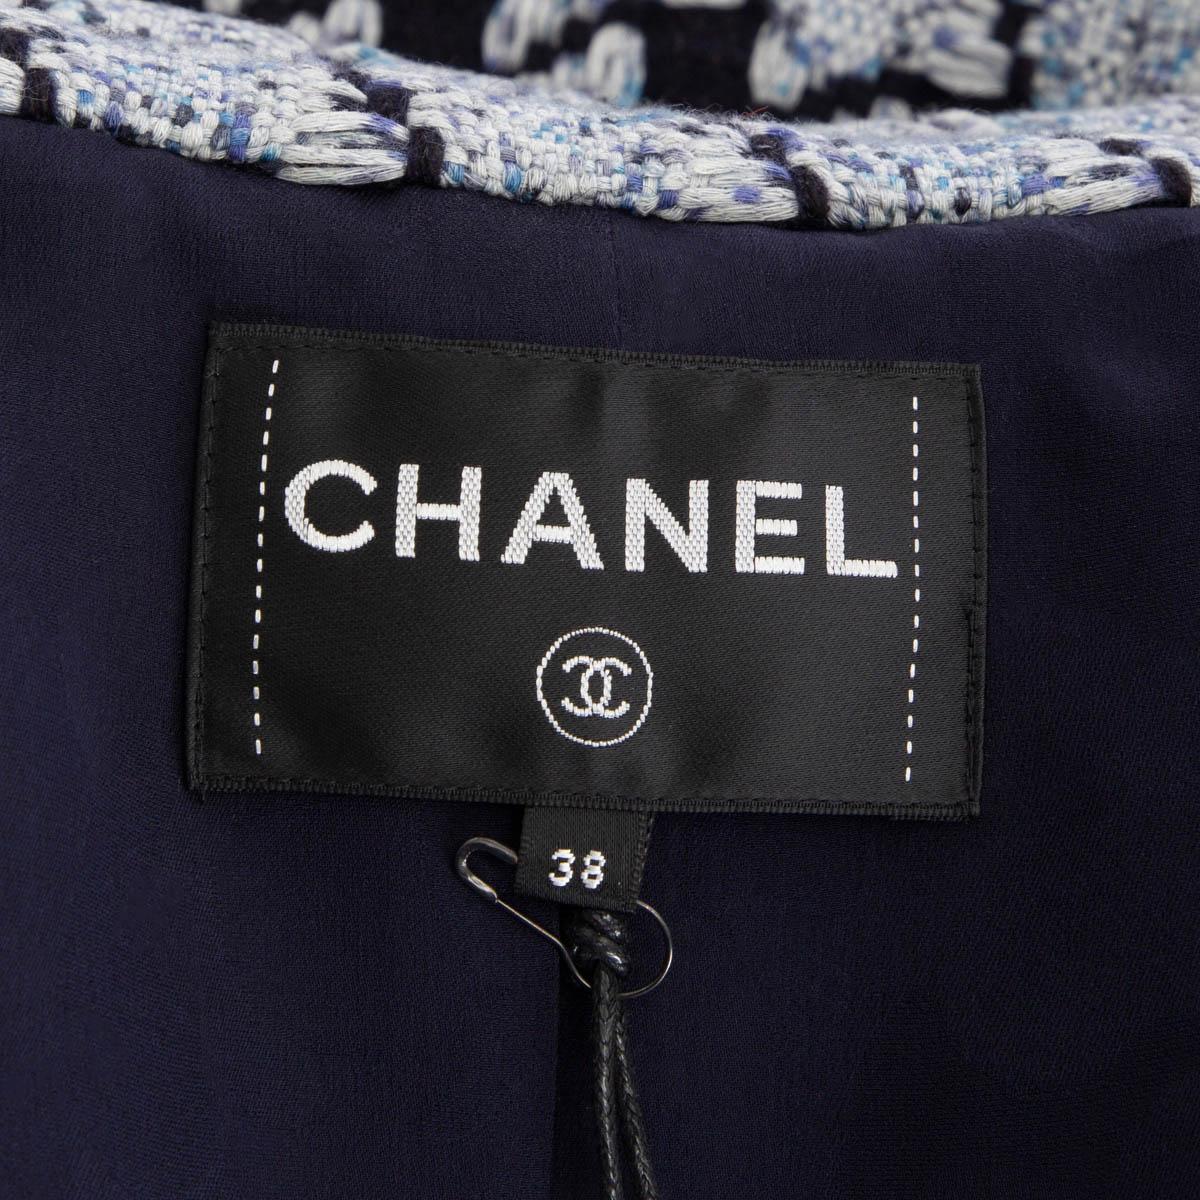 CHANEL light & navy blue cotton 2019 19B HOUNDSTOOTH TWEED Jacket 38 S 1